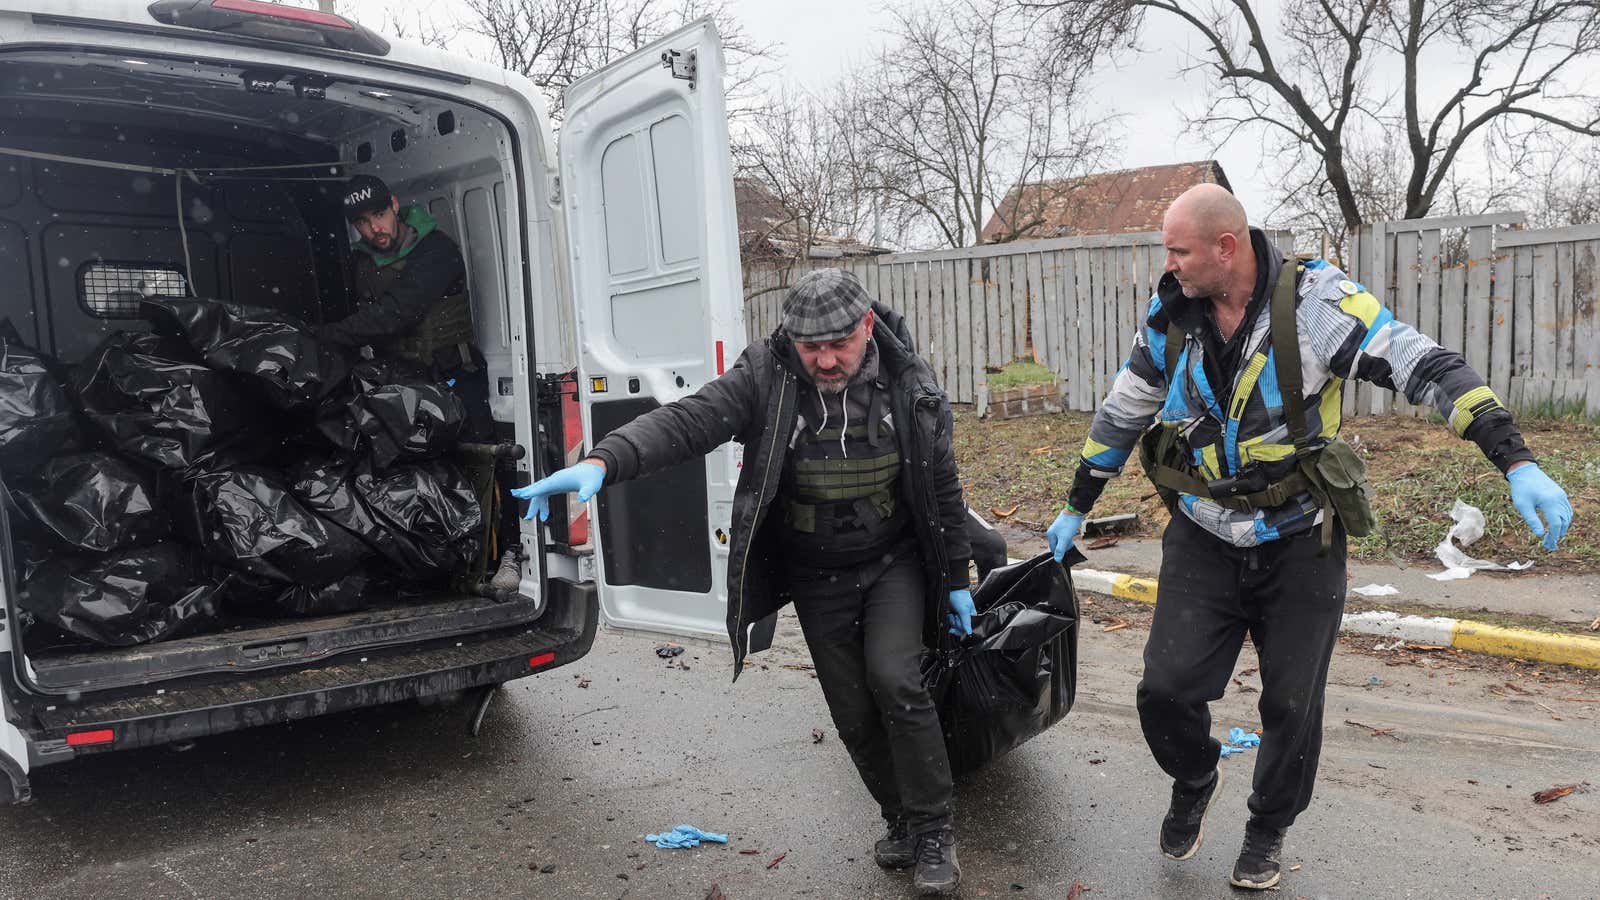 Volunteers in Bucha prepare to put the body of a civilian, who according to residents was killed by Russian soldiers, in a van carrying body bags.